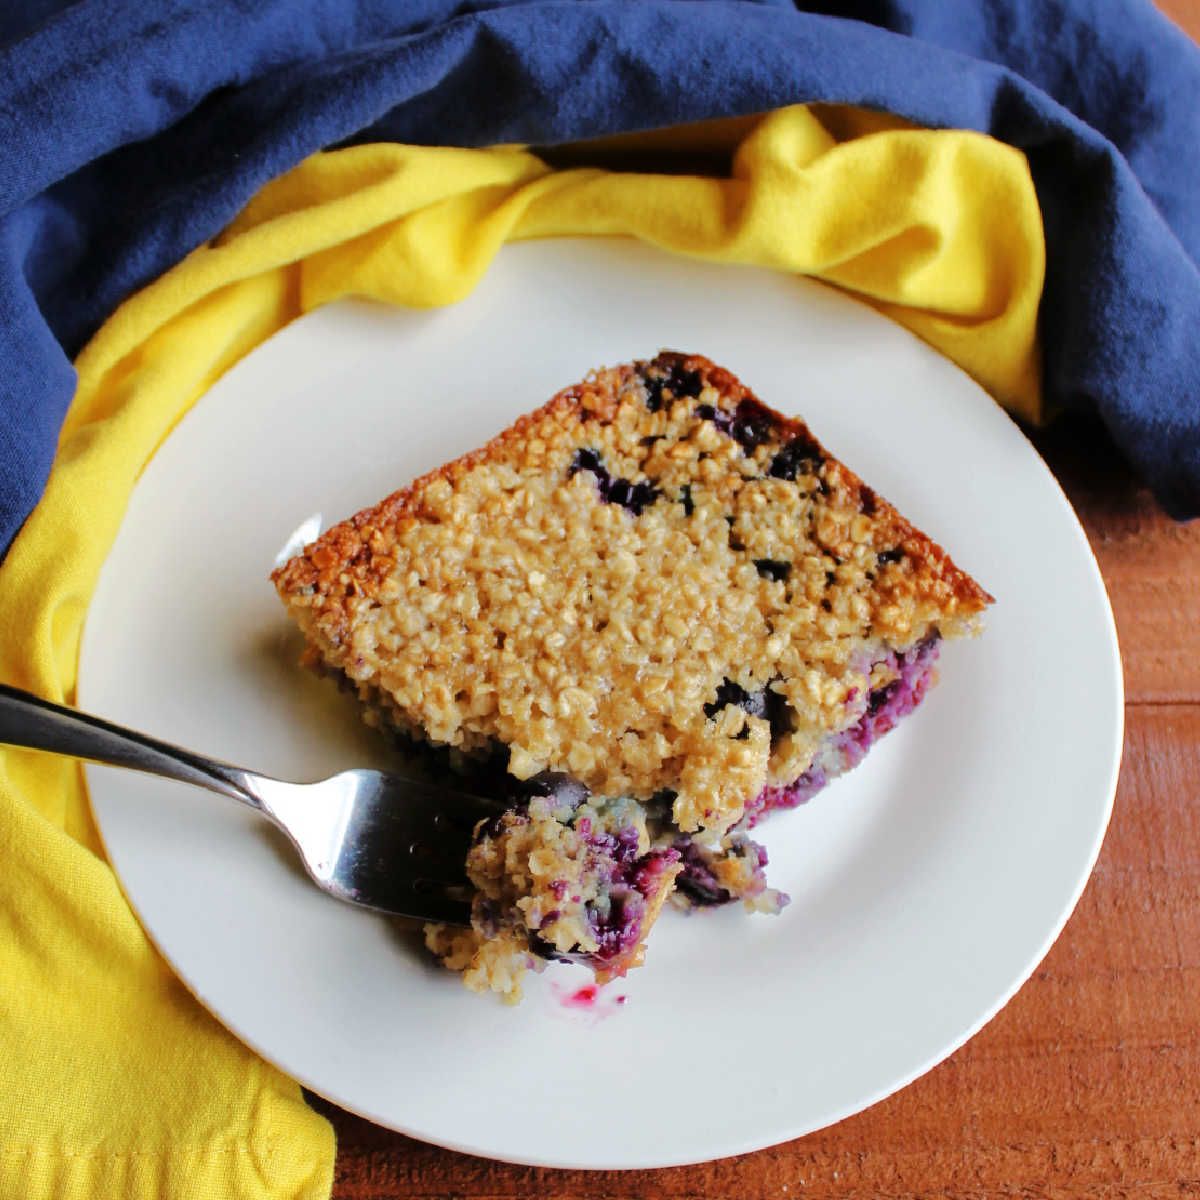 Bite of lemon blueberry baked oatmeal on fork showing soft texture and big blueberries inside, ready to be eaten.